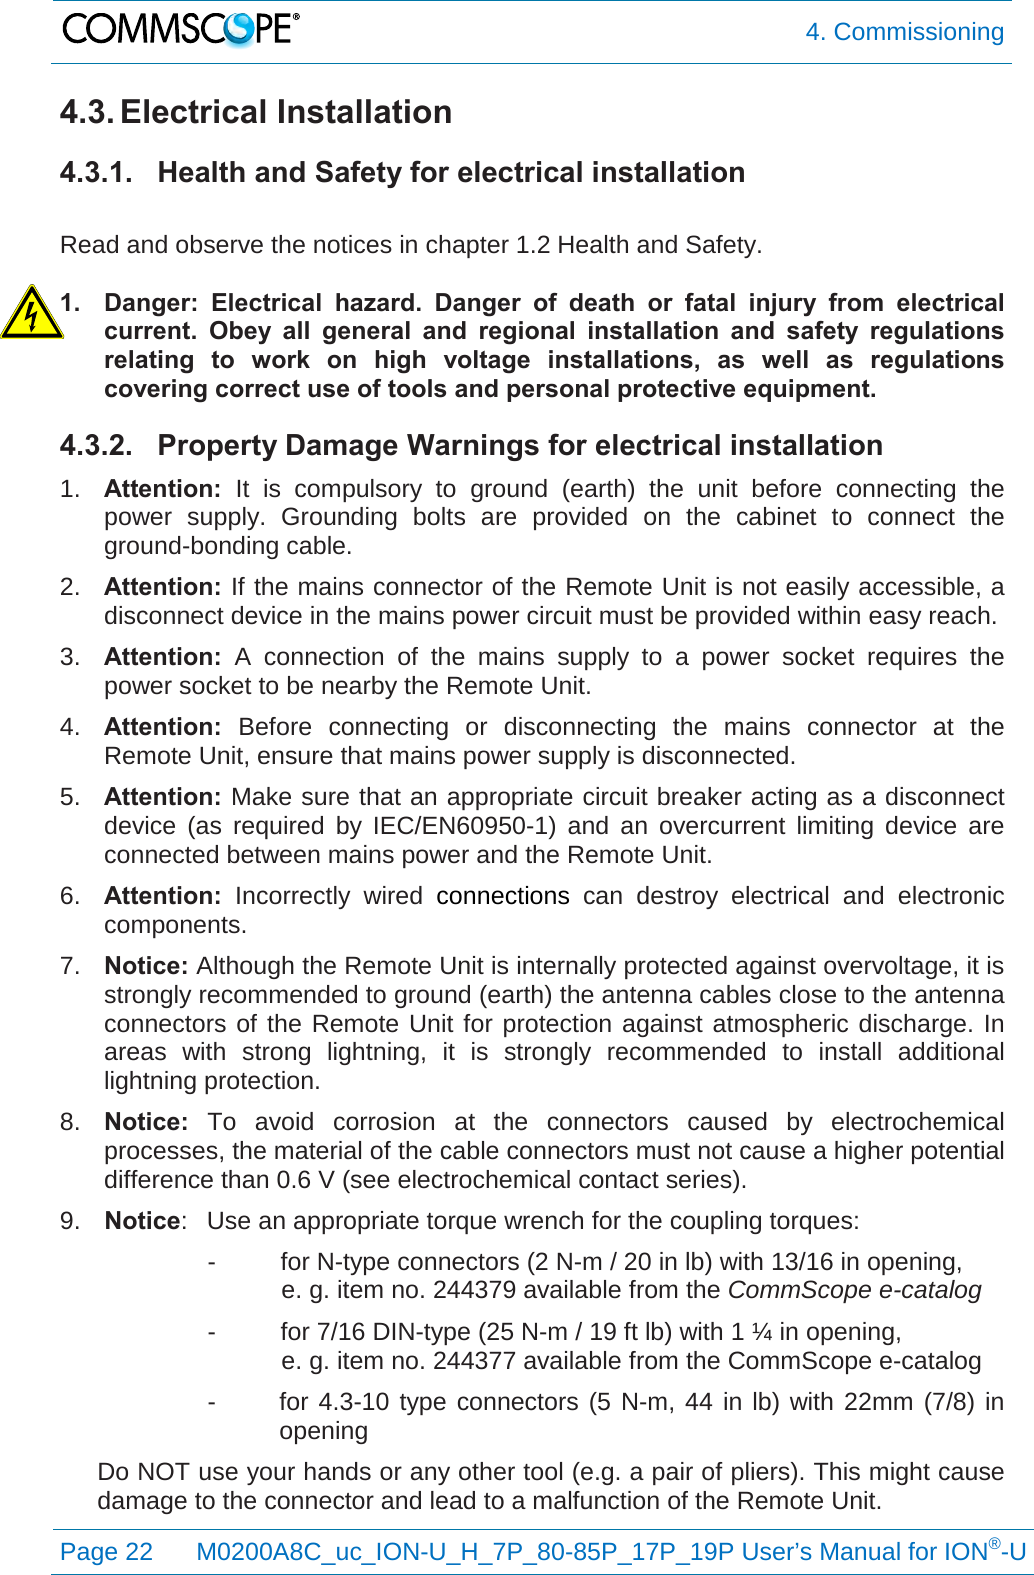  4. Commissioning  Page 22 M0200A8C_uc_ION-U_H_7P_80-85P_17P_19P User’s Manual for ION®-U  4.3. Electrical Installation 4.3.1. Health and Safety for electrical installation  Read and observe the notices in chapter 1.2 Health and Safety.  1. Danger: Electrical hazard. Danger of death or fatal injury from electrical current. Obey all general and regional installation and safety regulations relating to work on high voltage installations, as well as regulations covering correct use of tools and personal protective equipment. 4.3.2. Property Damage Warnings for electrical installation 1. Attention: It is compulsory to ground (earth) the unit before connecting the power supply. Grounding bolts are provided on the cabinet to connect the ground-bonding cable. 2. Attention: If the mains connector of the Remote Unit is not easily accessible, a disconnect device in the mains power circuit must be provided within easy reach. 3. Attention: A connection of the mains supply to a power socket requires the power socket to be nearby the Remote Unit. 4. Attention:  Before connecting or disconnecting the mains connector at the Remote Unit, ensure that mains power supply is disconnected. 5. Attention: Make sure that an appropriate circuit breaker acting as a disconnect device (as required by IEC/EN60950-1) and an overcurrent limiting device are connected between mains power and the Remote Unit. 6. Attention: Incorrectly wired connections can destroy electrical and electronic components. 7. Notice: Although the Remote Unit is internally protected against overvoltage, it is strongly recommended to ground (earth) the antenna cables close to the antenna connectors of the Remote Unit for protection against atmospheric discharge. In areas with strong lightning, it is strongly recommended to install additional lightning protection. 8. Notice: To avoid corrosion at the connectors caused by electrochemical processes, the material of the cable connectors must not cause a higher potential difference than 0.6 V (see electrochemical contact series). 9. Notice:  Use an appropriate torque wrench for the coupling torques:  -  for N-type connectors (2 N-m / 20 in lb) with 13/16 in opening,  e. g. item no. 244379 available from the CommScope e-catalog -  for 7/16 DIN-type (25 N-m / 19 ft lb) with 1 ¼ in opening,  e. g. item no. 244377 available from the CommScope e-catalog -  for 4.3-10 type connectors (5 N-m, 44 in lb) with 22mm (7/8) in opening Do NOT use your hands or any other tool (e.g. a pair of pliers). This might cause damage to the connector and lead to a malfunction of the Remote Unit. 